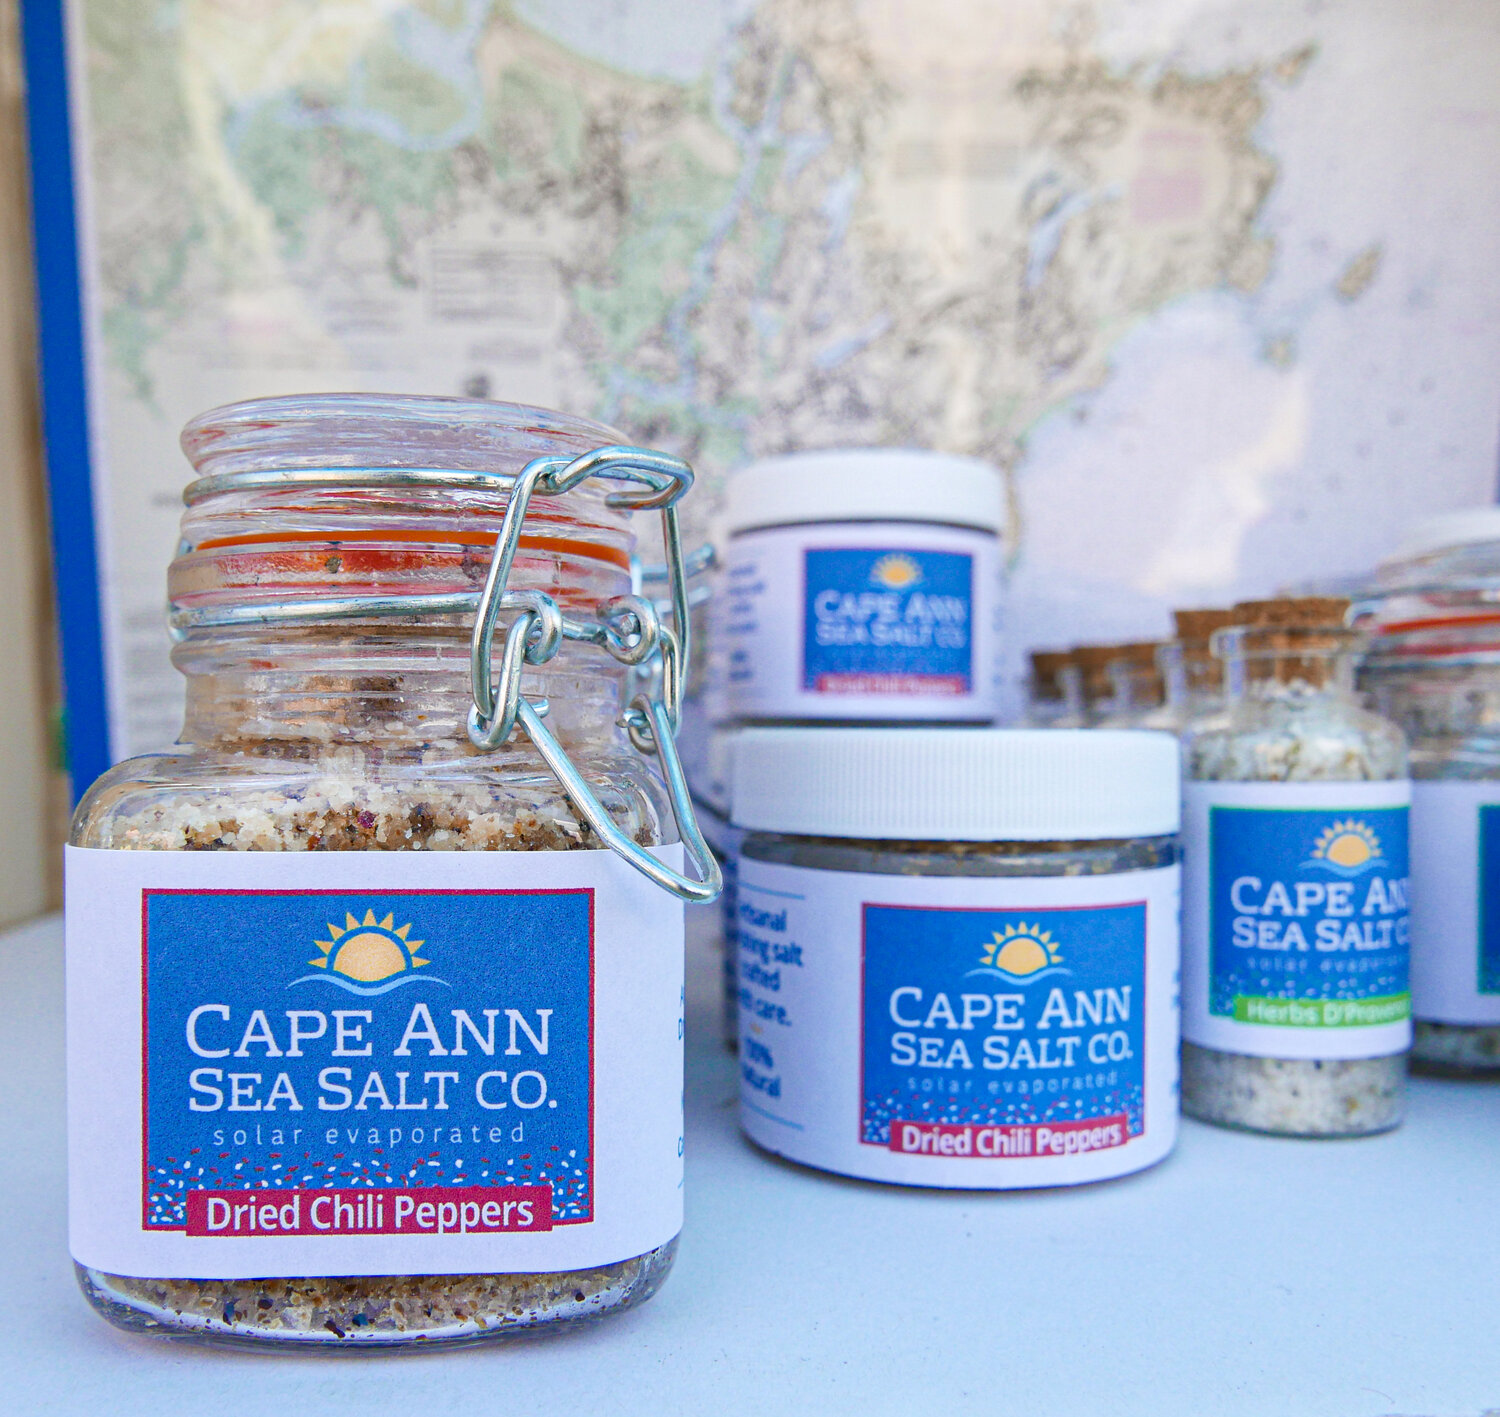 Finishing salts are having a moment now, and with all that the right dash can do for everything from steaks to exotic ice creams, their time in the sun is deserved.  Made from pure ocean water that evaporates slowly and naturally by the sun and breeze right here on Cape Ann.  Get it in unadulterated “plain” or in lovely flavors like lavender, chili pepper, lemon, or black pepper rosemary.  $9.95 to $29.95, at capeannseasalt.com or weekly at the Magnolia Farmer’s Market on Lexington Avenue, Magnolia (Sundays).